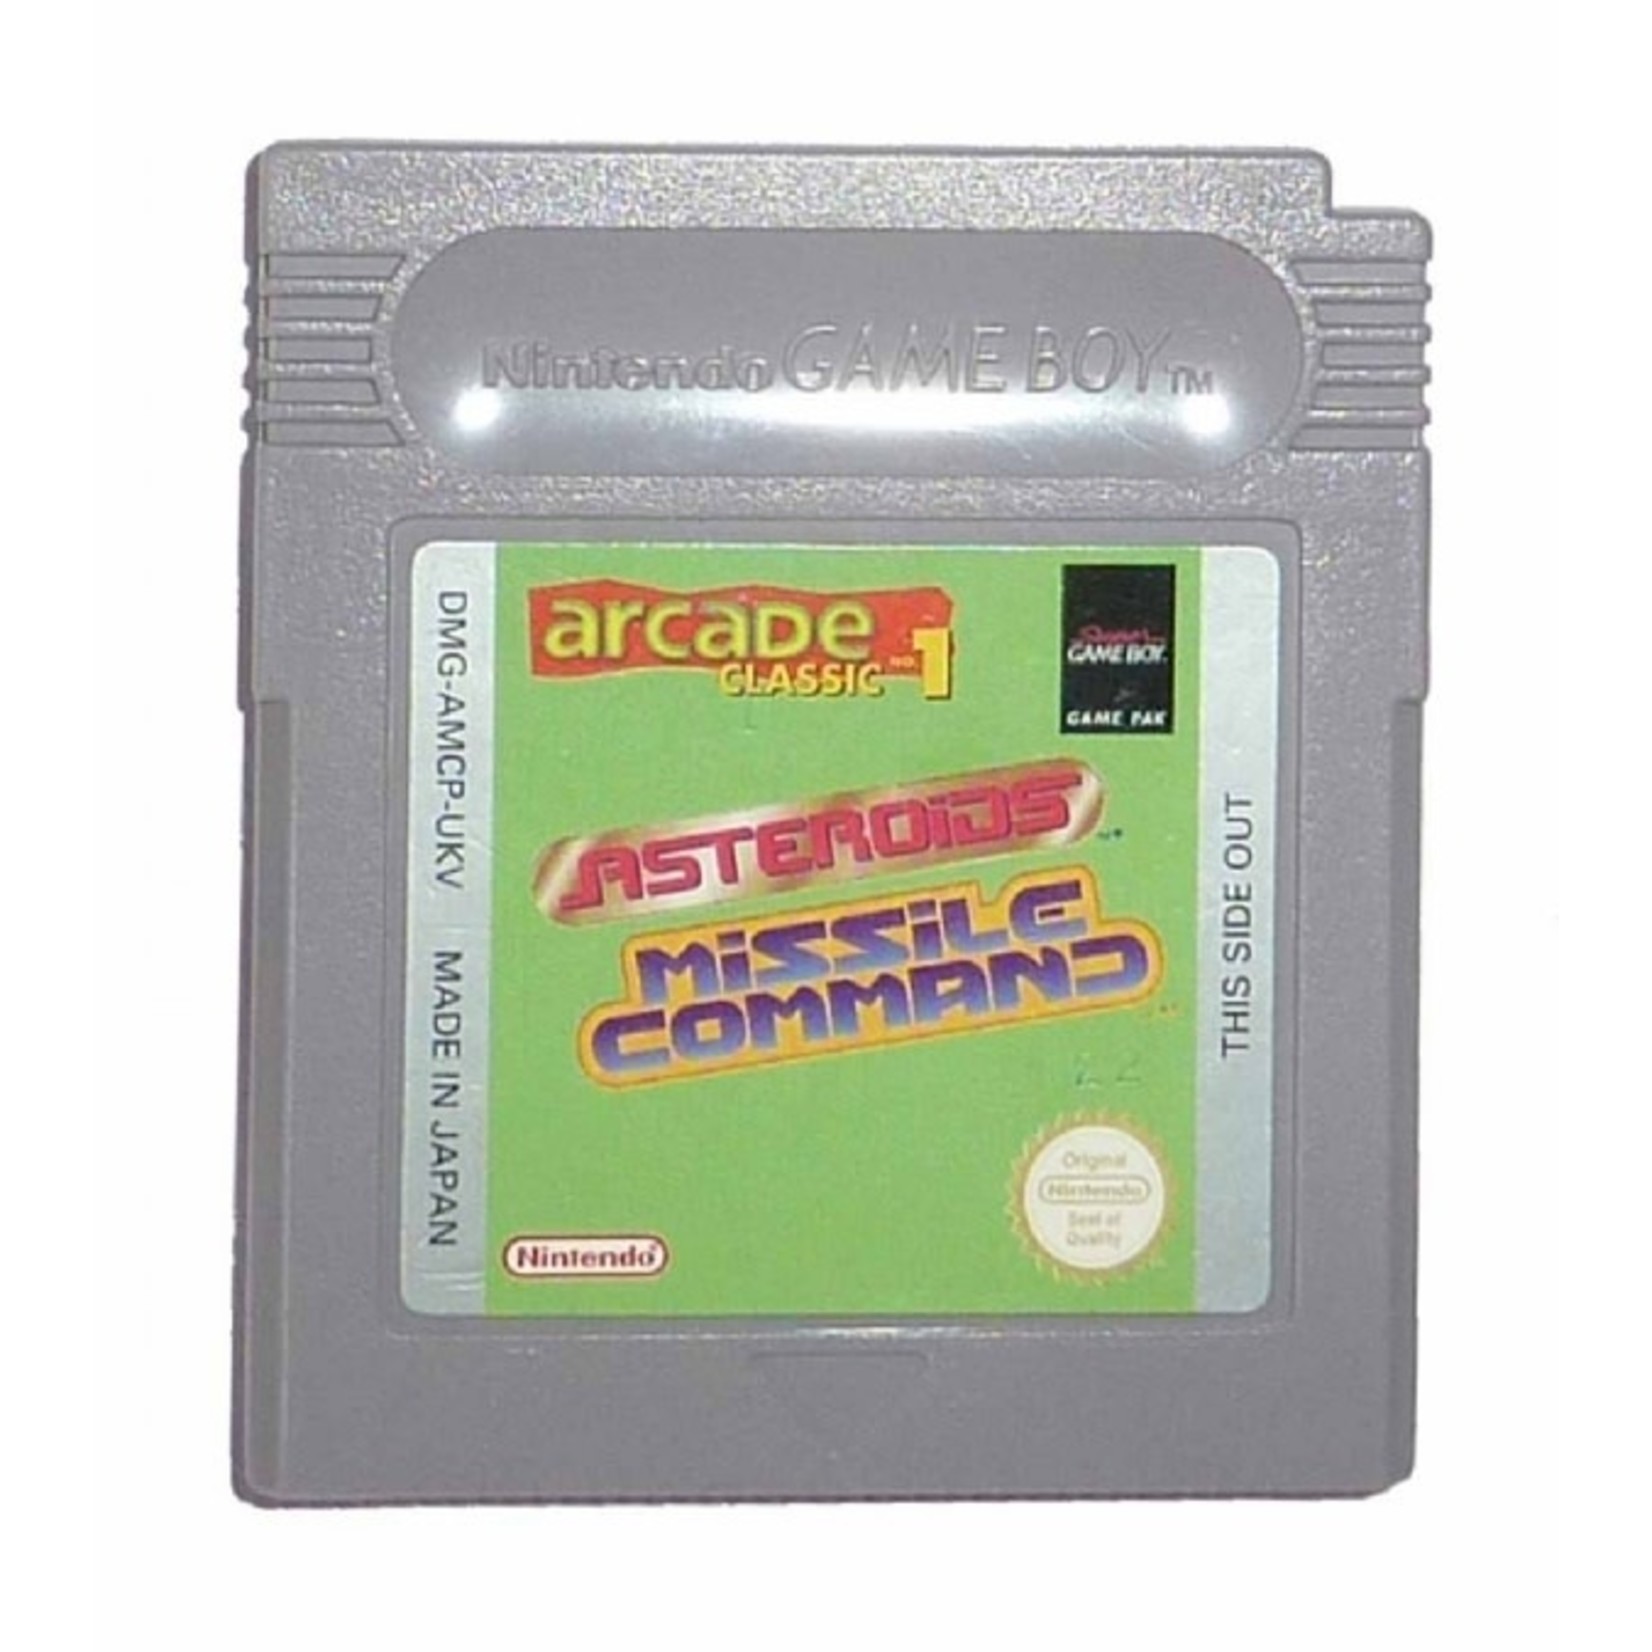 GBU-Arcade Classic: Asteroids And Missile Command